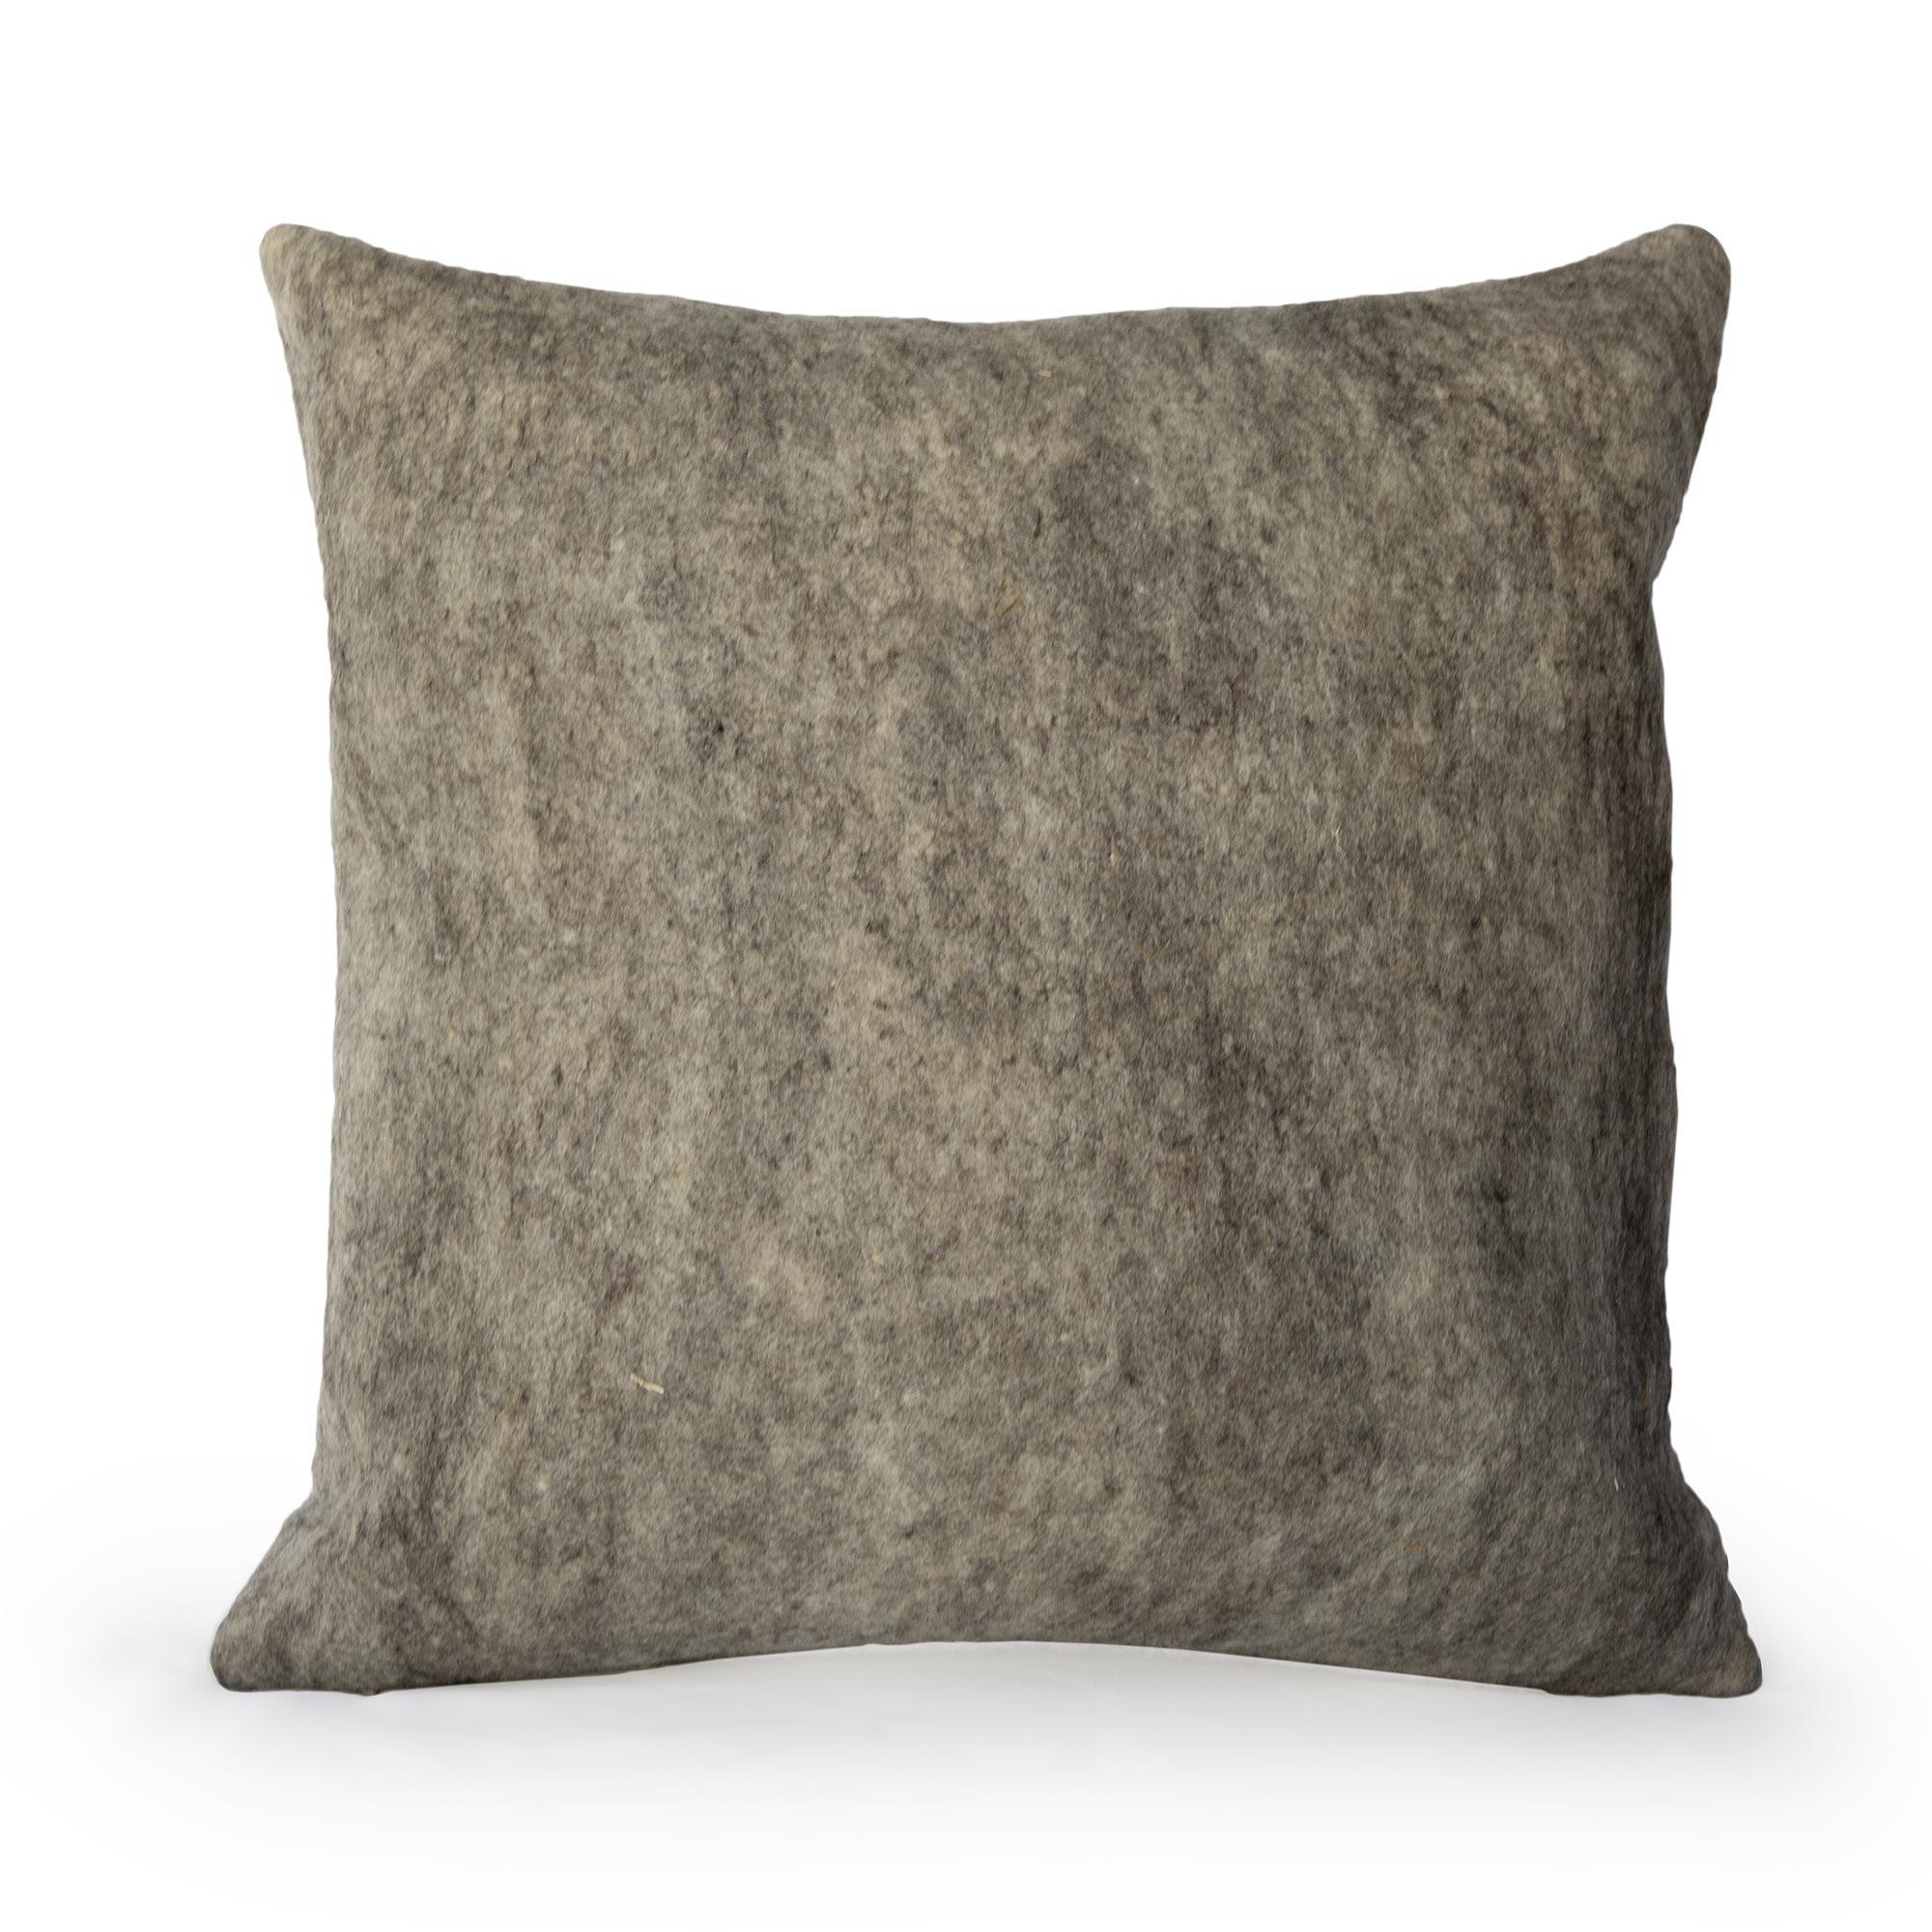 Organic Modern Wool Wensleydale Throw Pillow, Gray, Heritage Sheep Collection For Sale